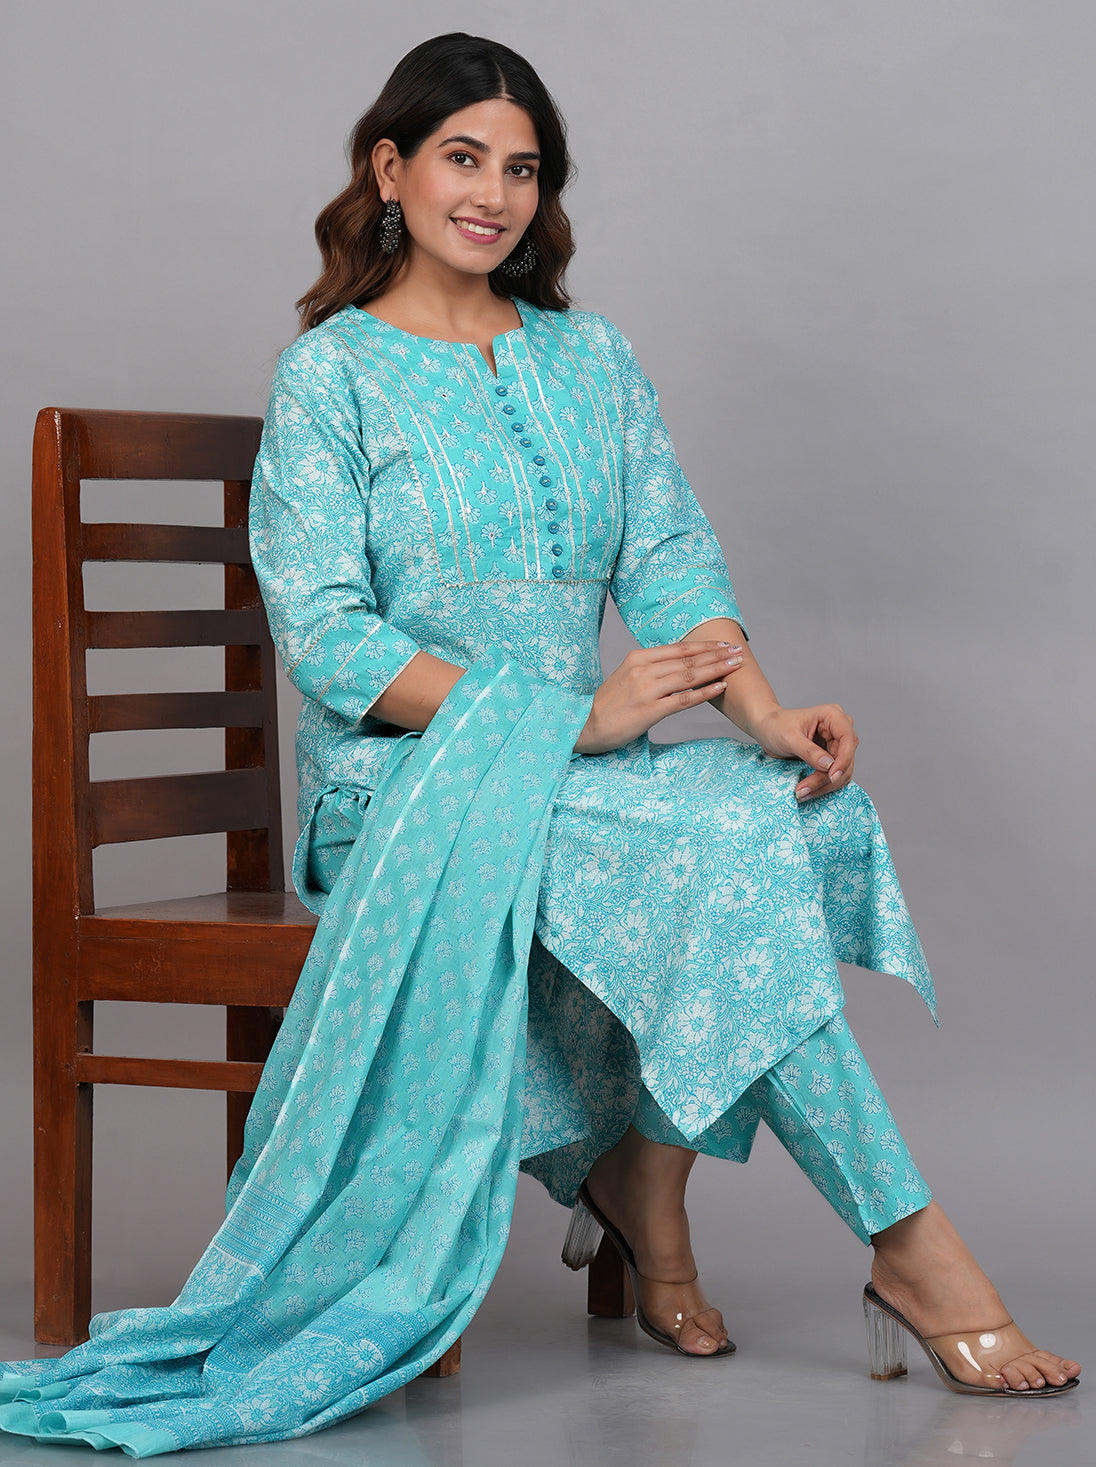 Yash Gallery Women's Floral Printed Kurta with Pant and Dupatta (Sky Blue)